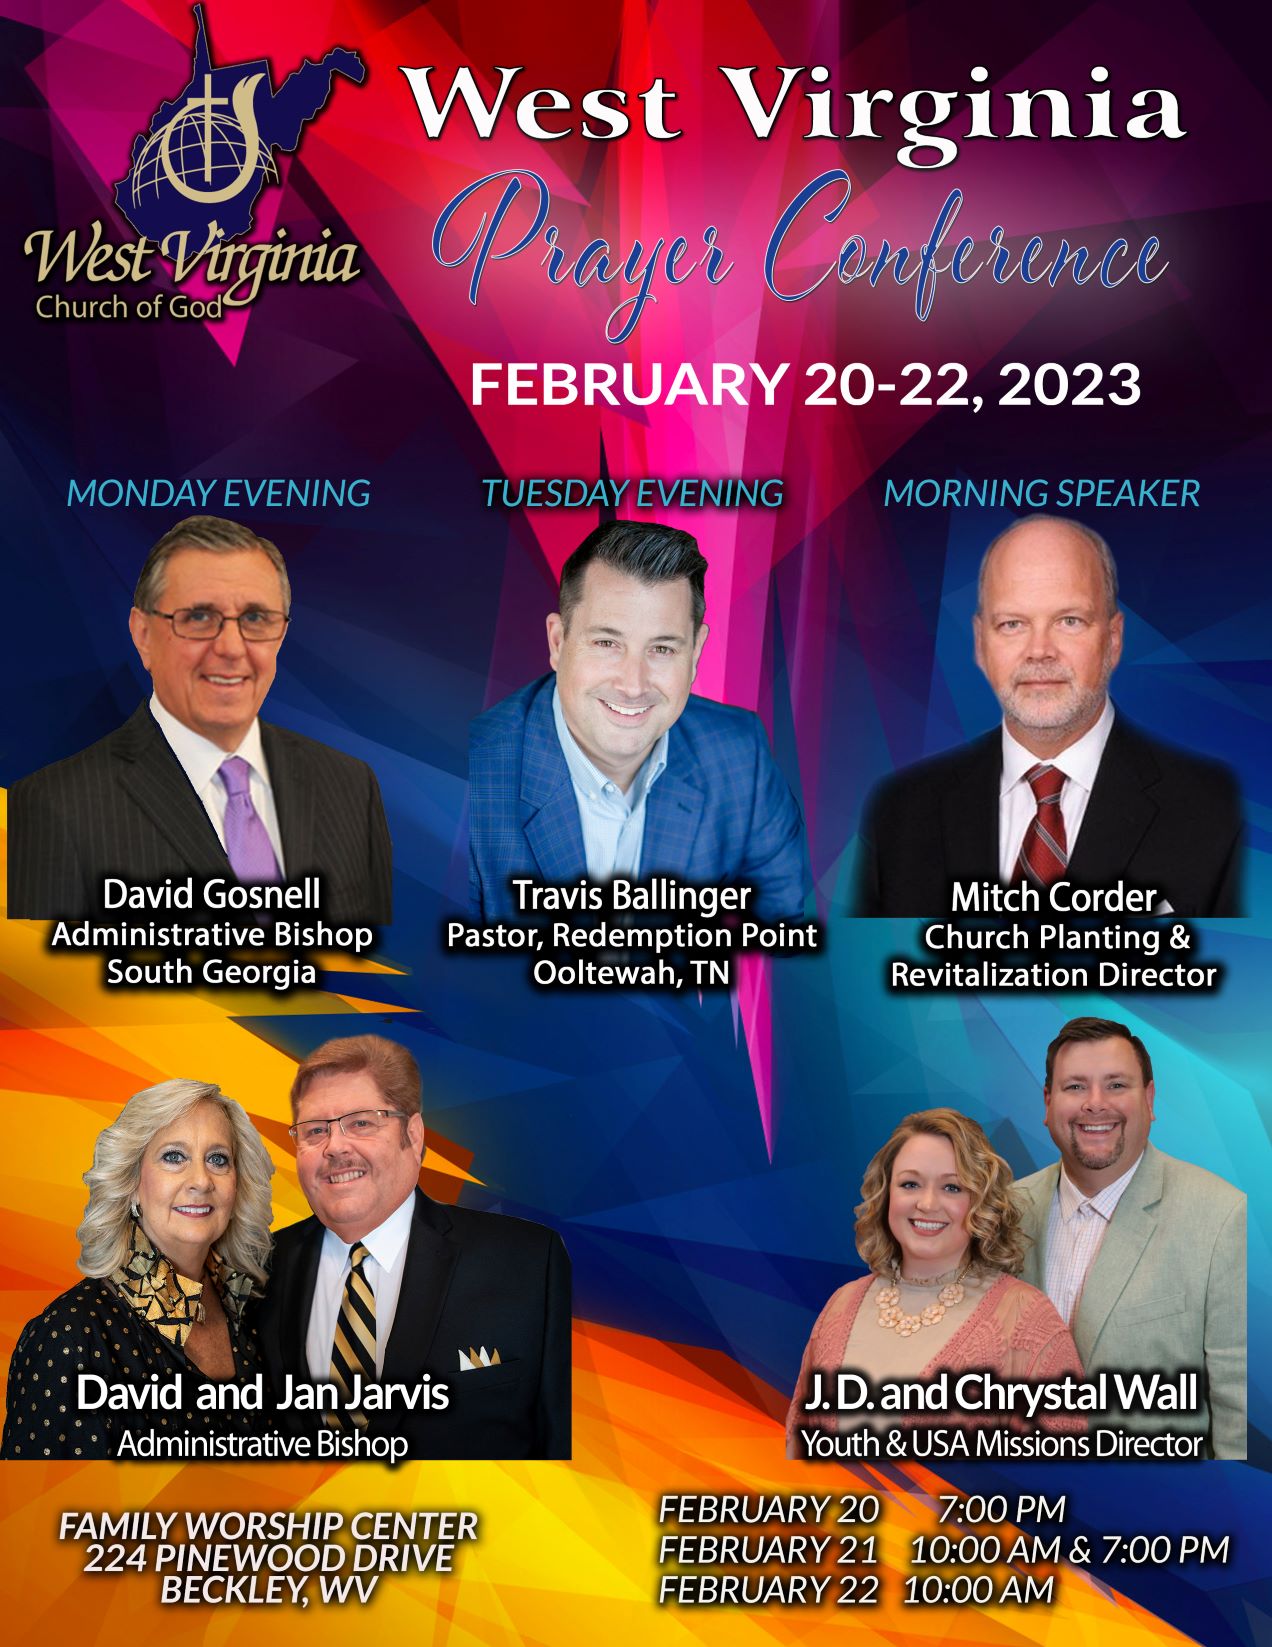 Prayer Conference February 2022, 2023 West Virginia Church of God